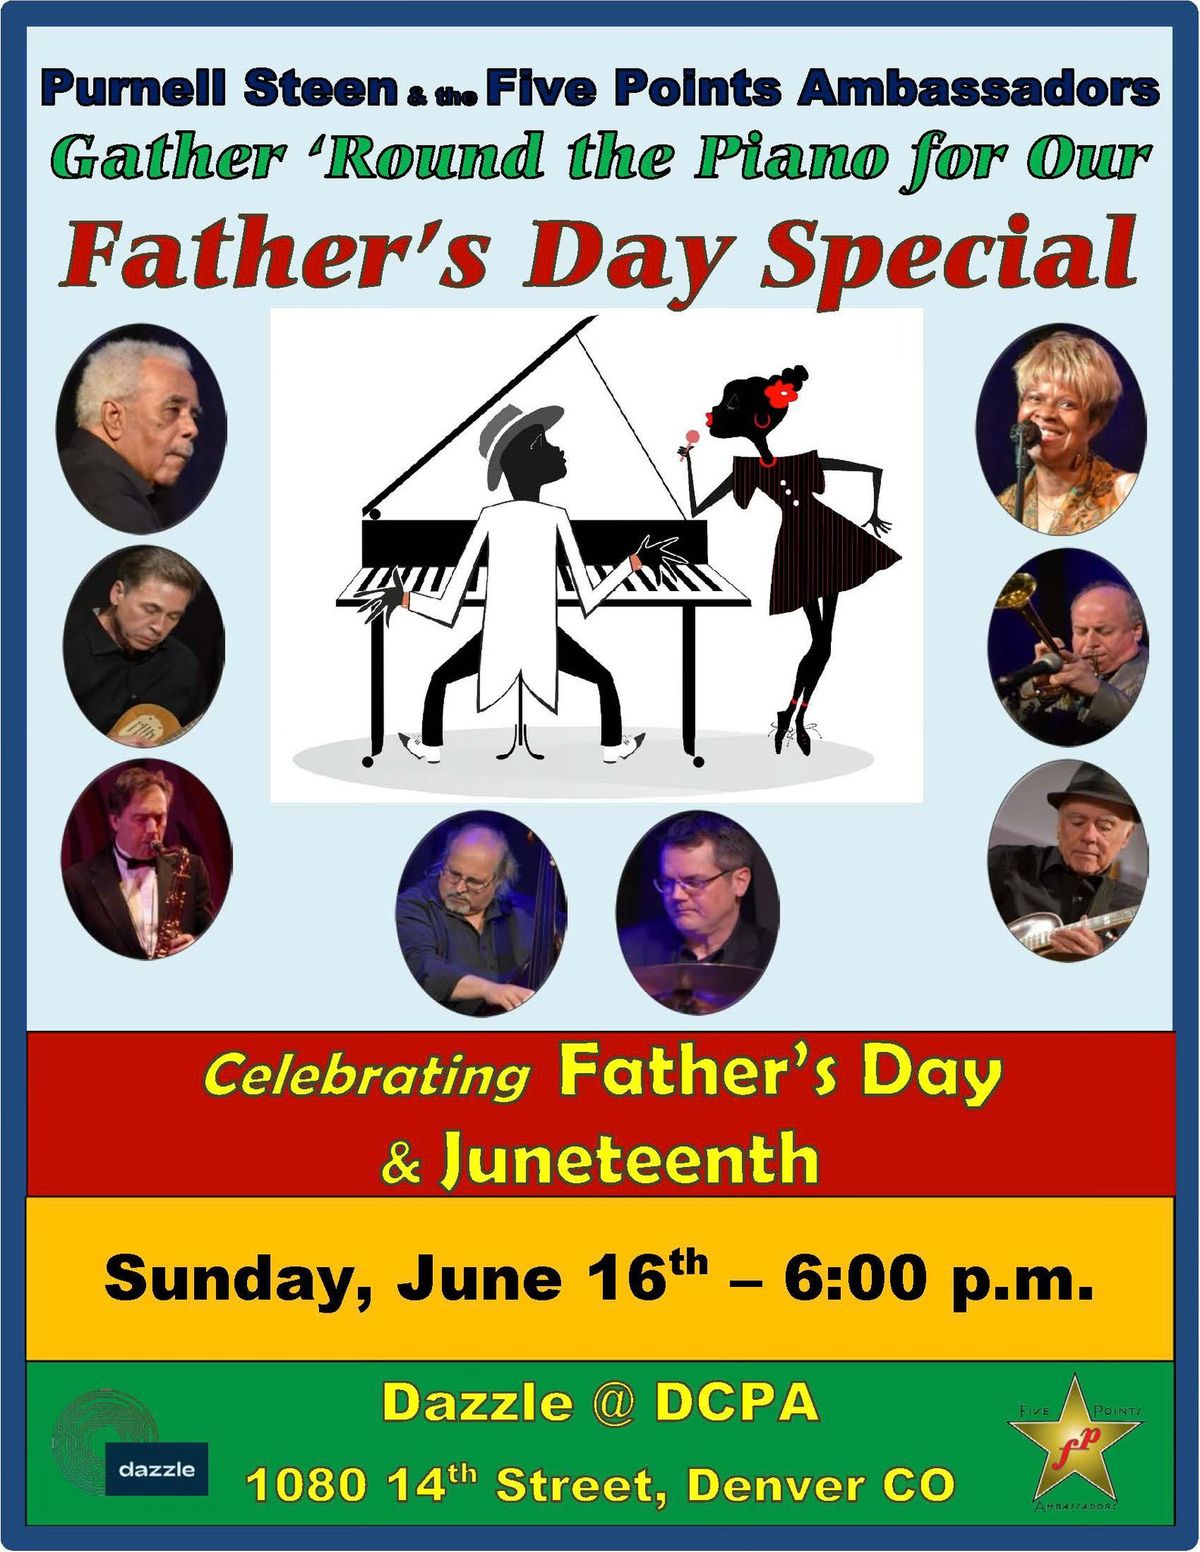 Purnell Steen and the Five Points Ambassadors: Celebrating Father's Day & Juneteenth